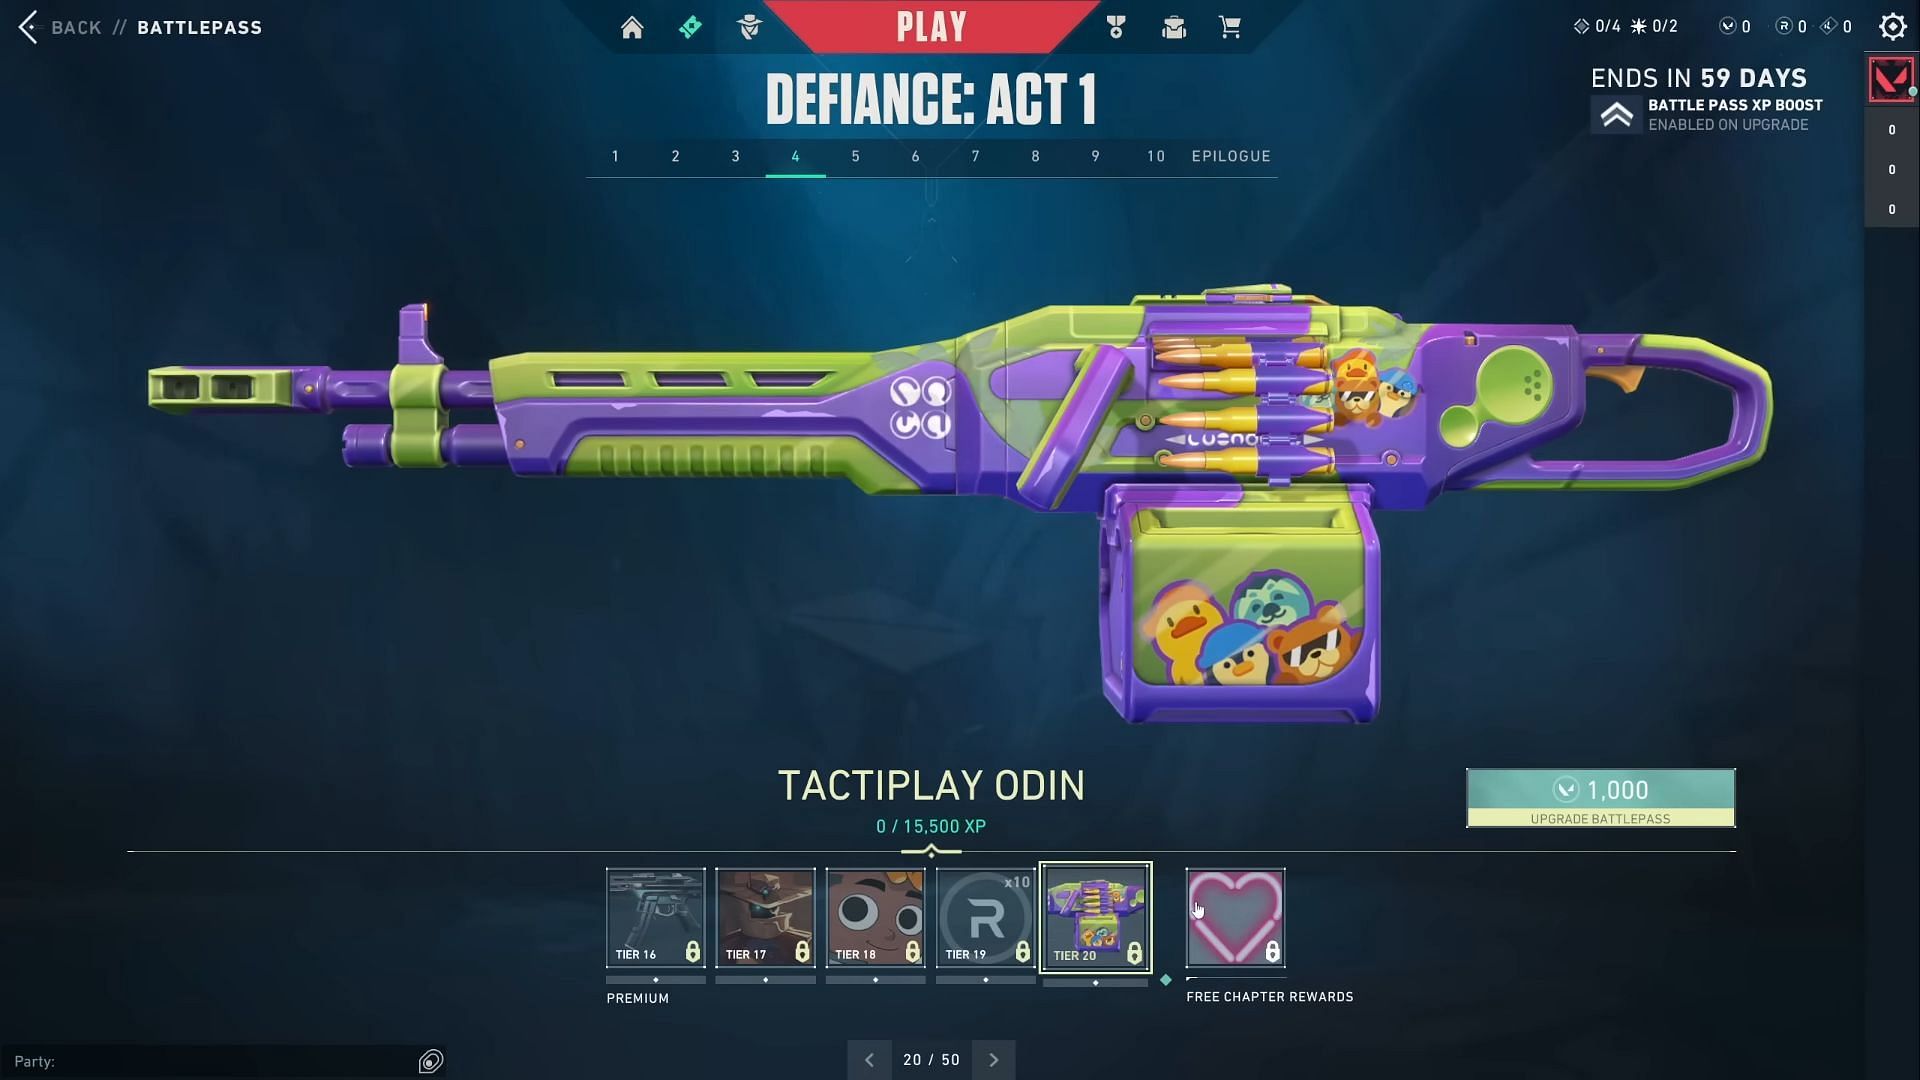 The Tactiplay Odin (Image via Riot Games)